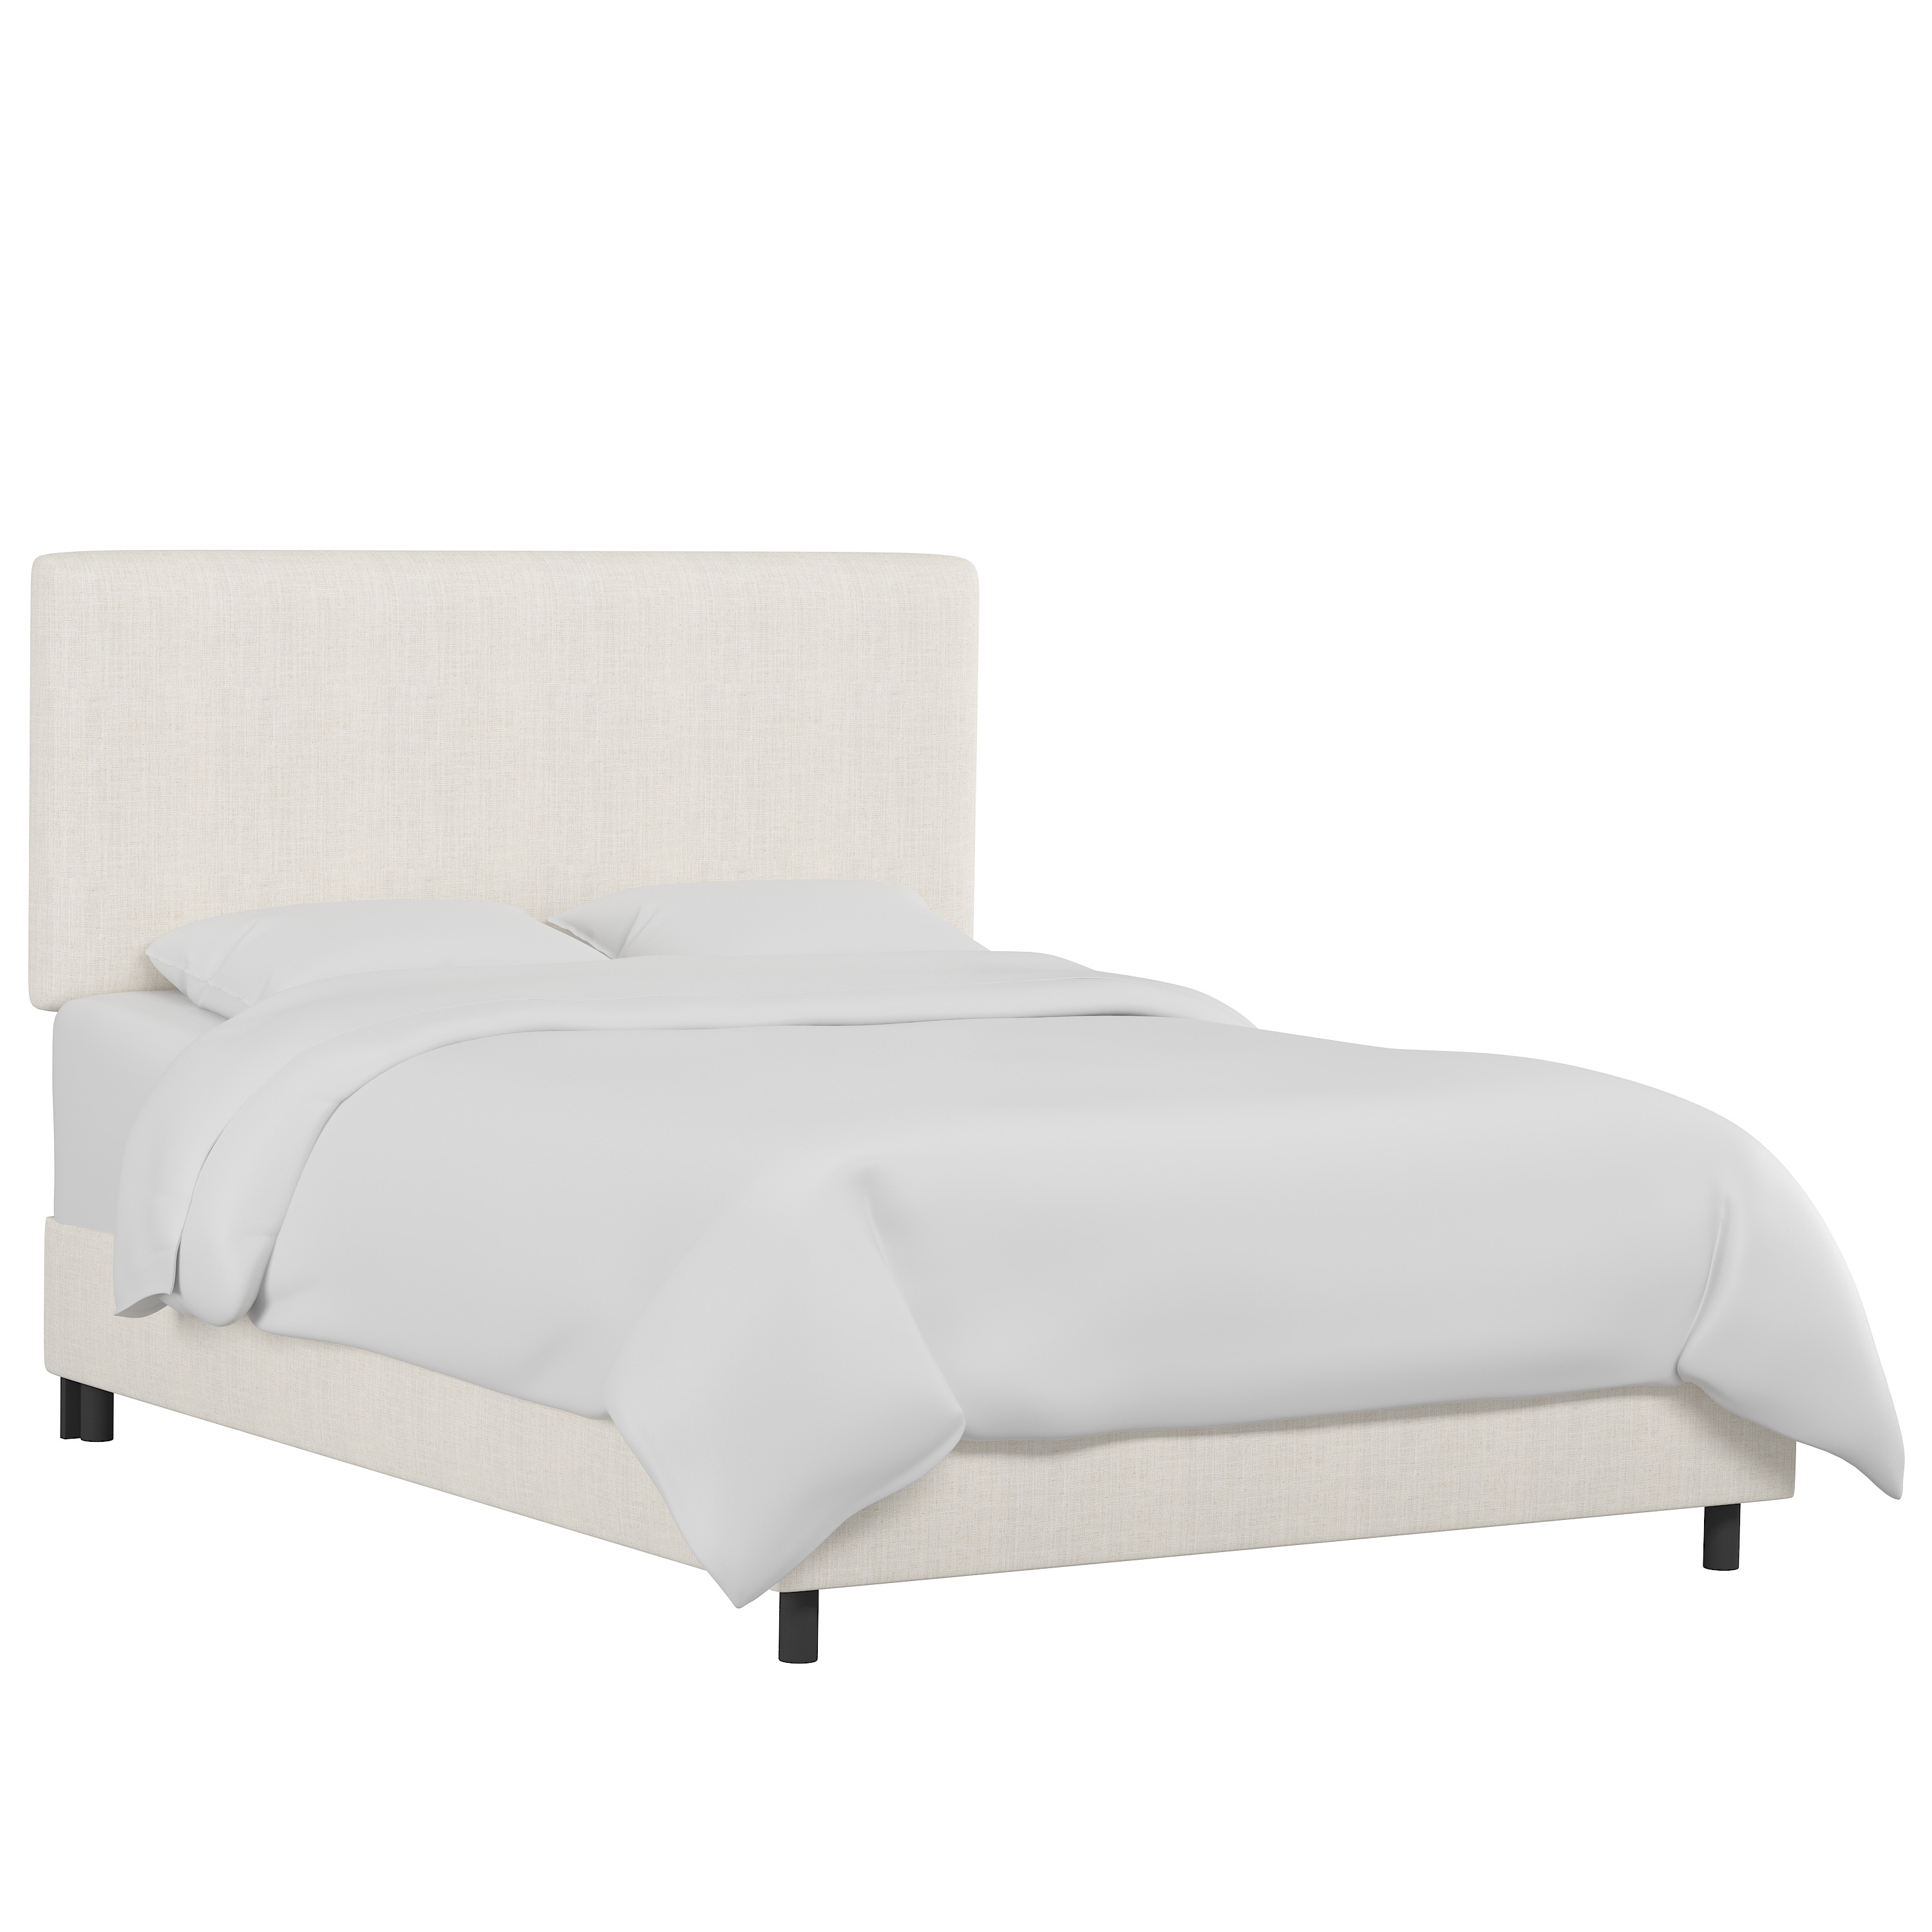 California King Sawyer Bed in Linen Talc - Image 1